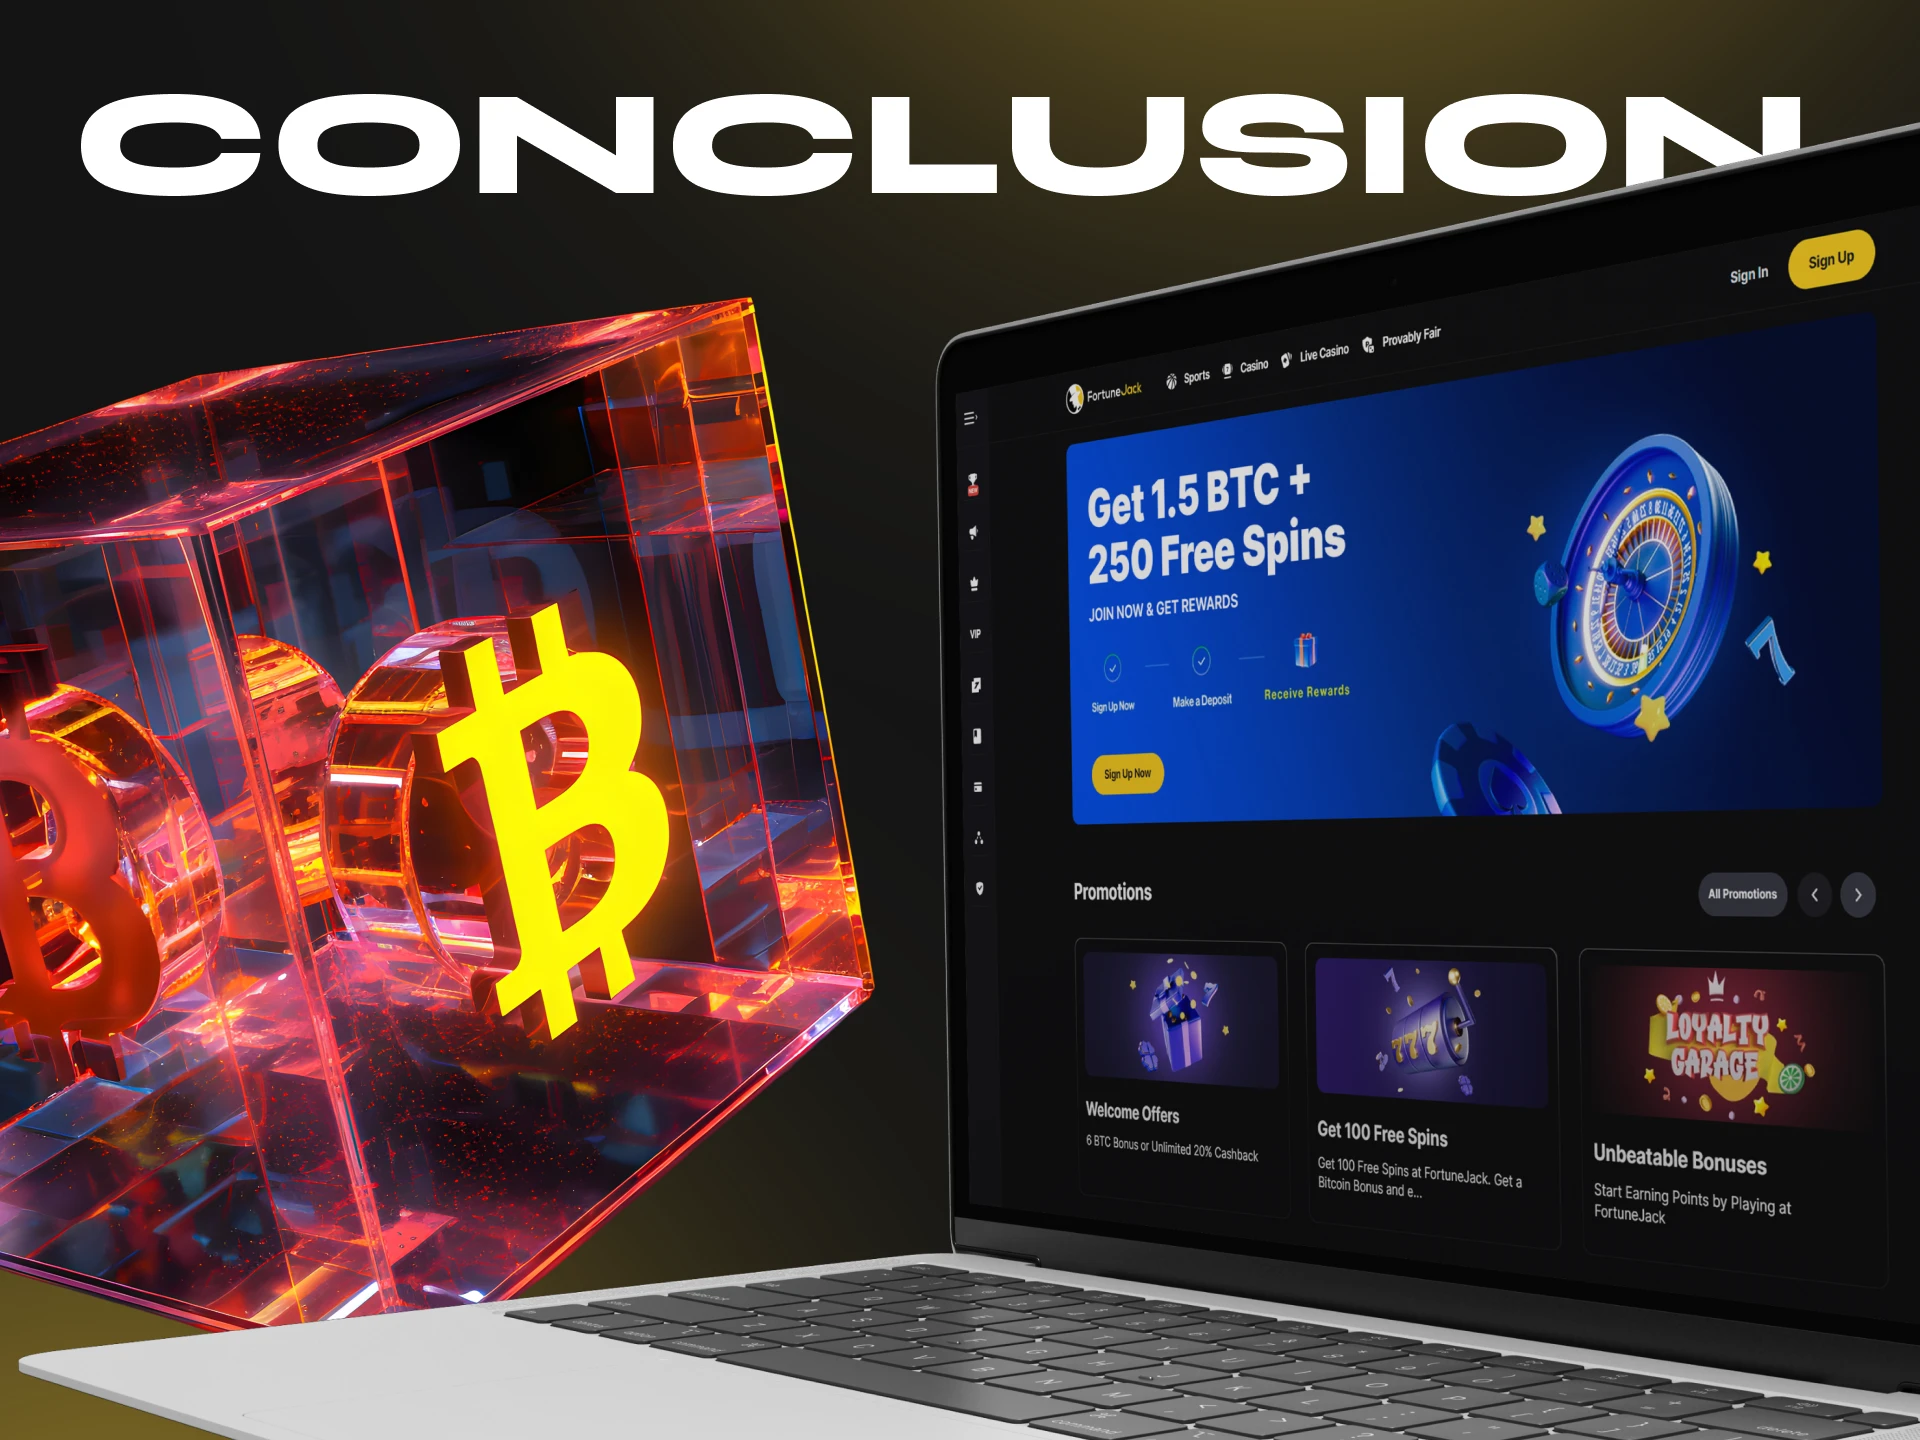 Play at FortuneJack Casino with cryptocurrency and win big.